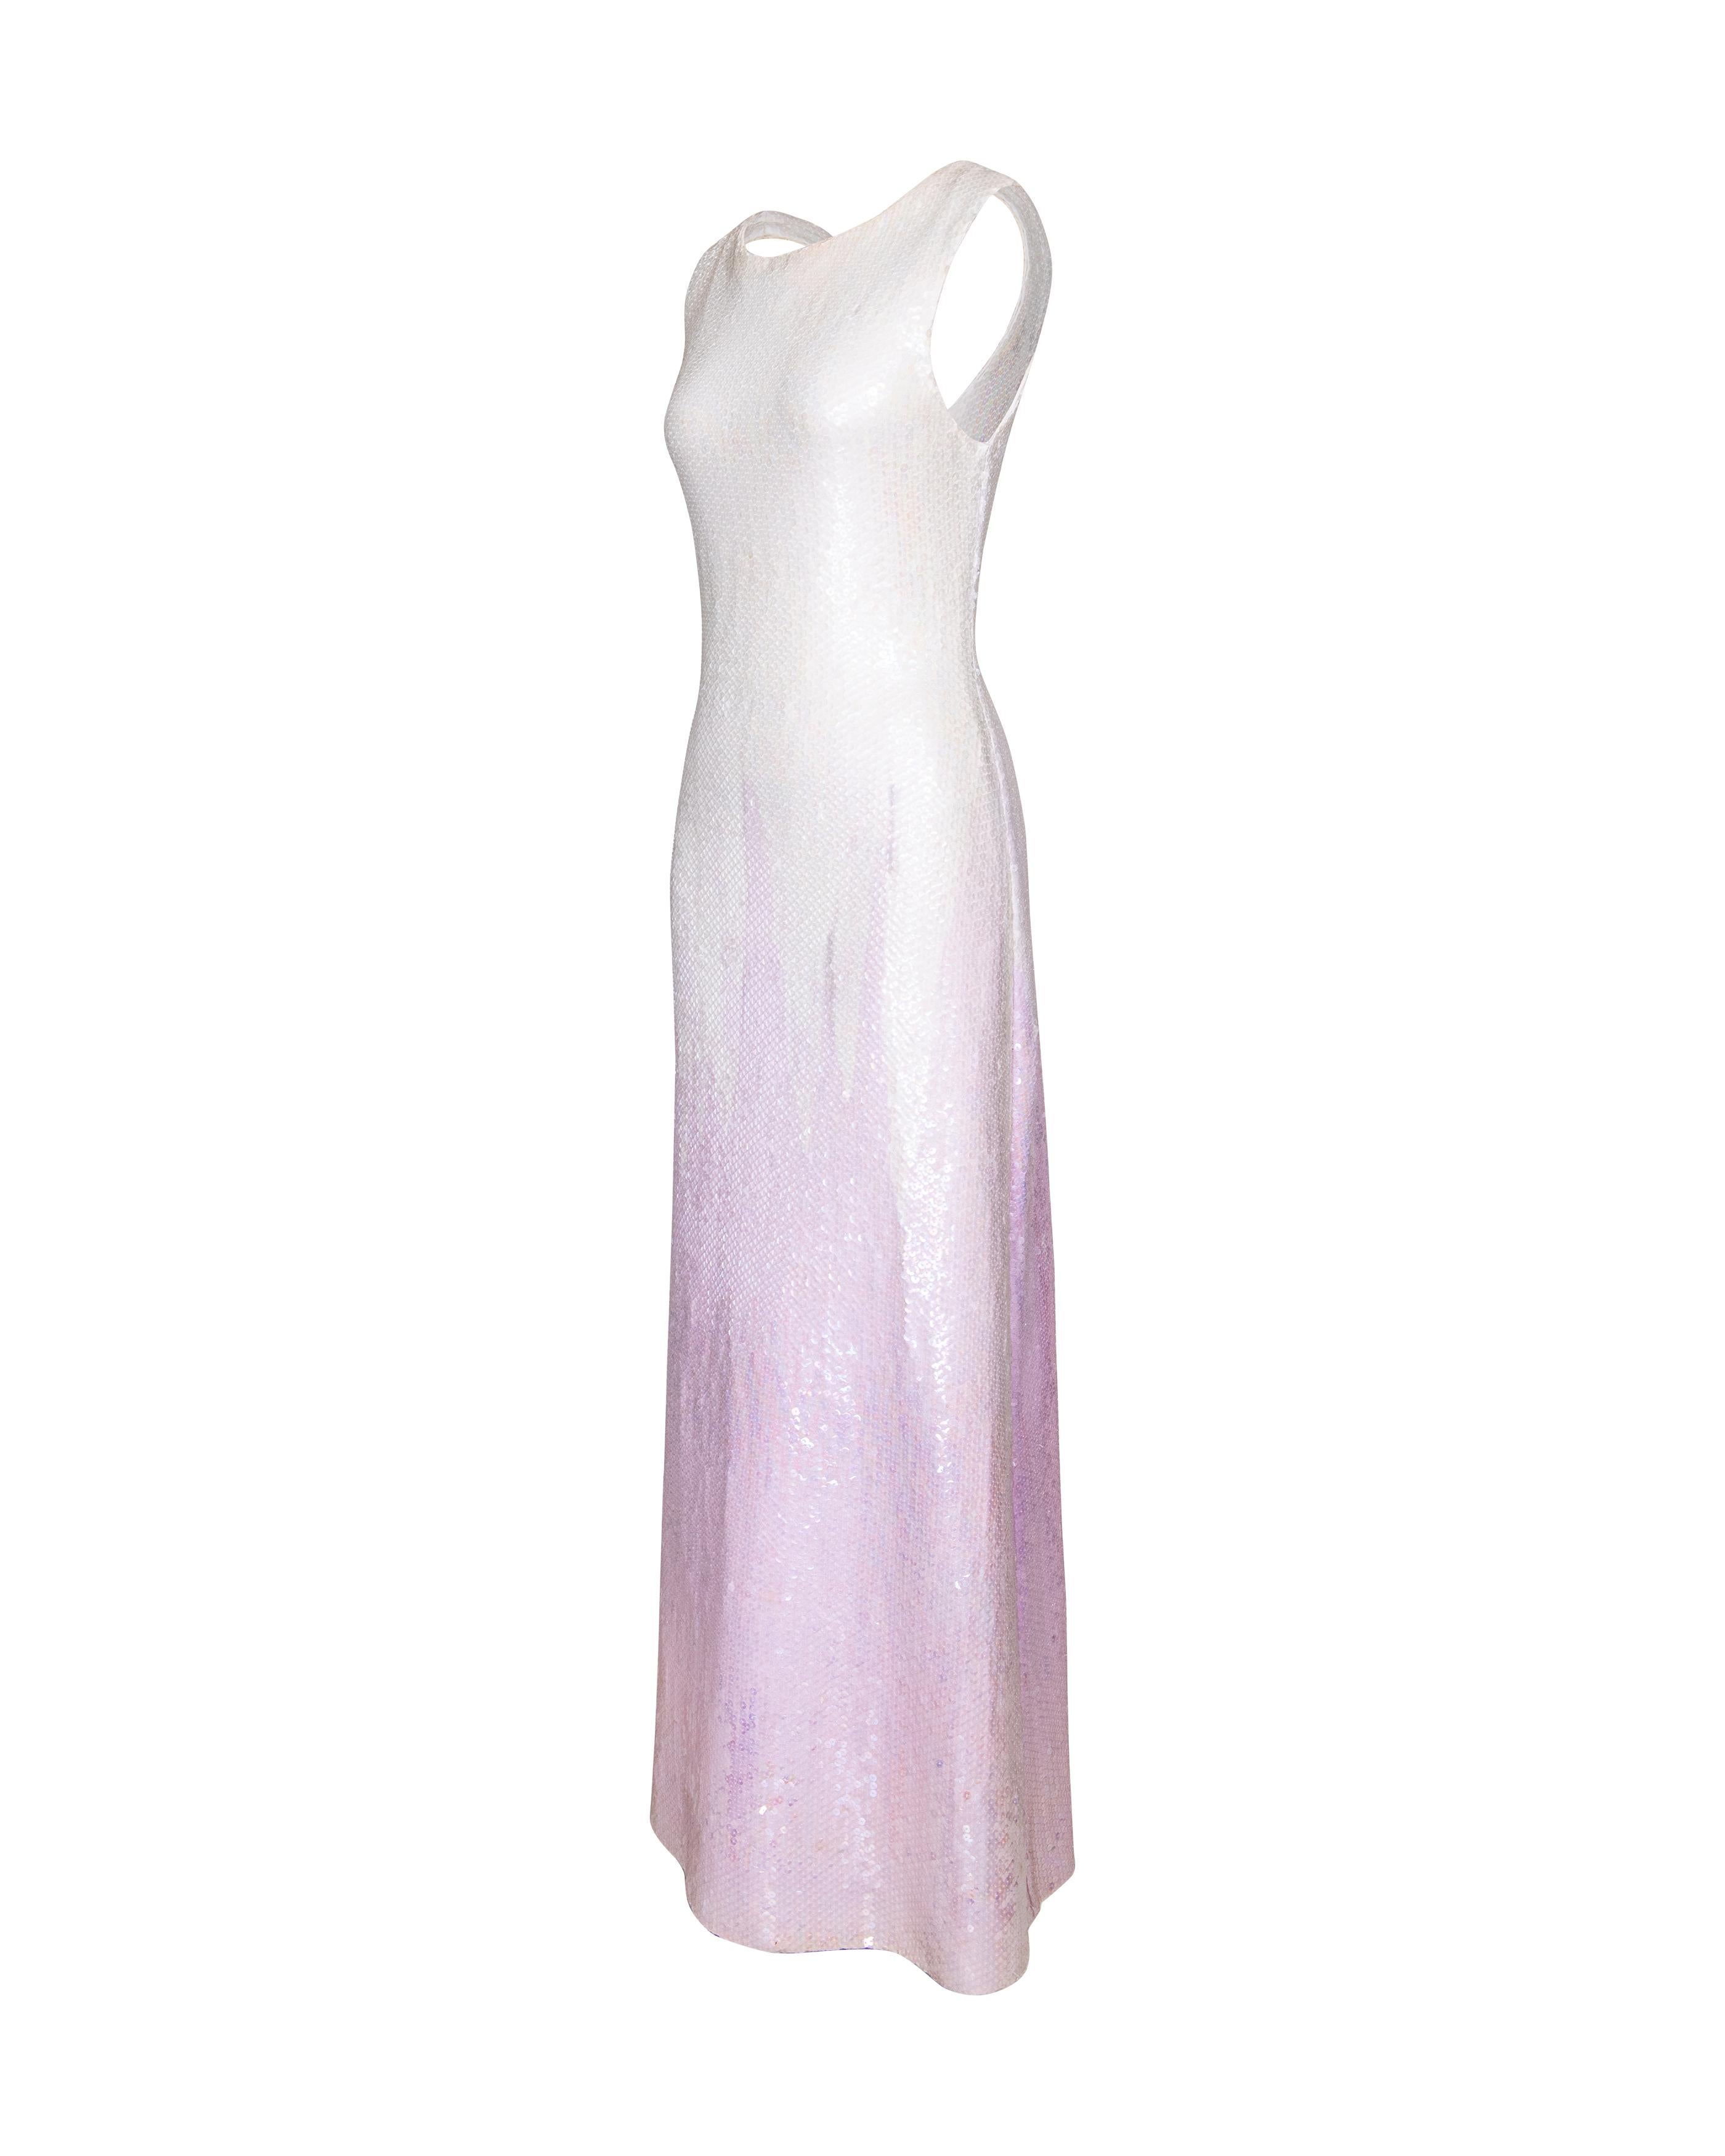 A/W 1973 Halston Sleeveless Geometric Point Sequin Gradient Gown In Good Condition For Sale In North Hollywood, CA